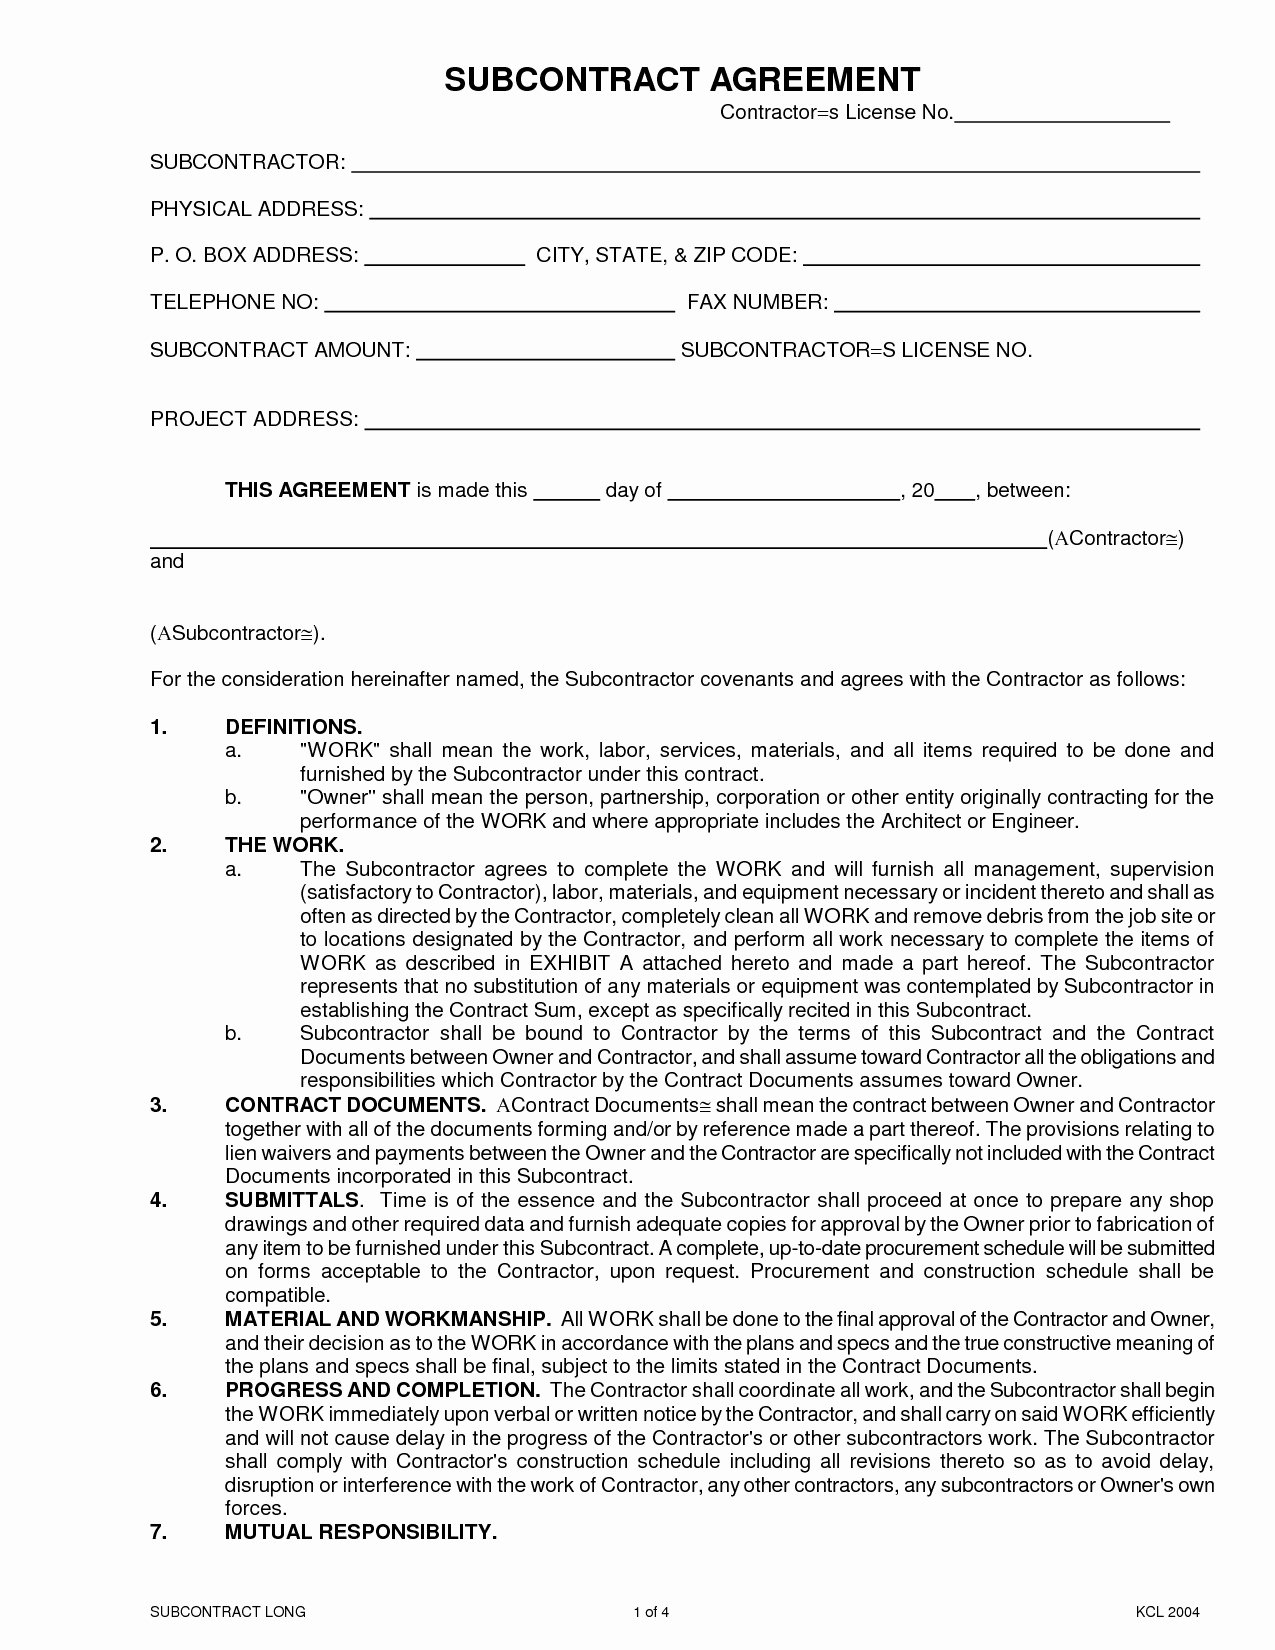 Subcontractor Agreement Template Free Lovely 25 Basic Contractor Subcontractor Agreement form Fe